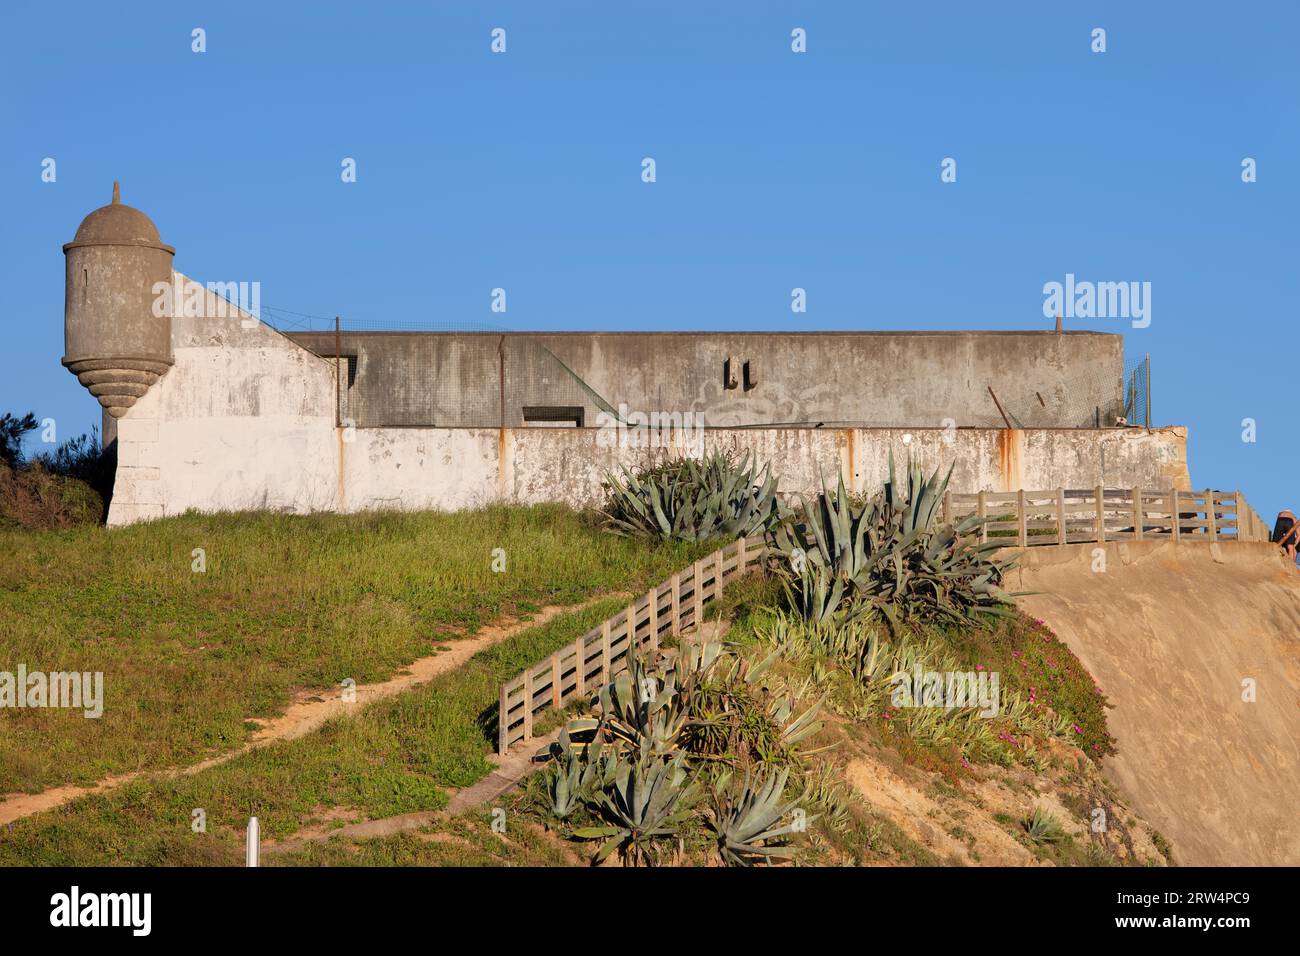 Fort of Saint Peter (Forte de Sao Pedro), 17th century fortification in Estoril, Portugal Stock Photo